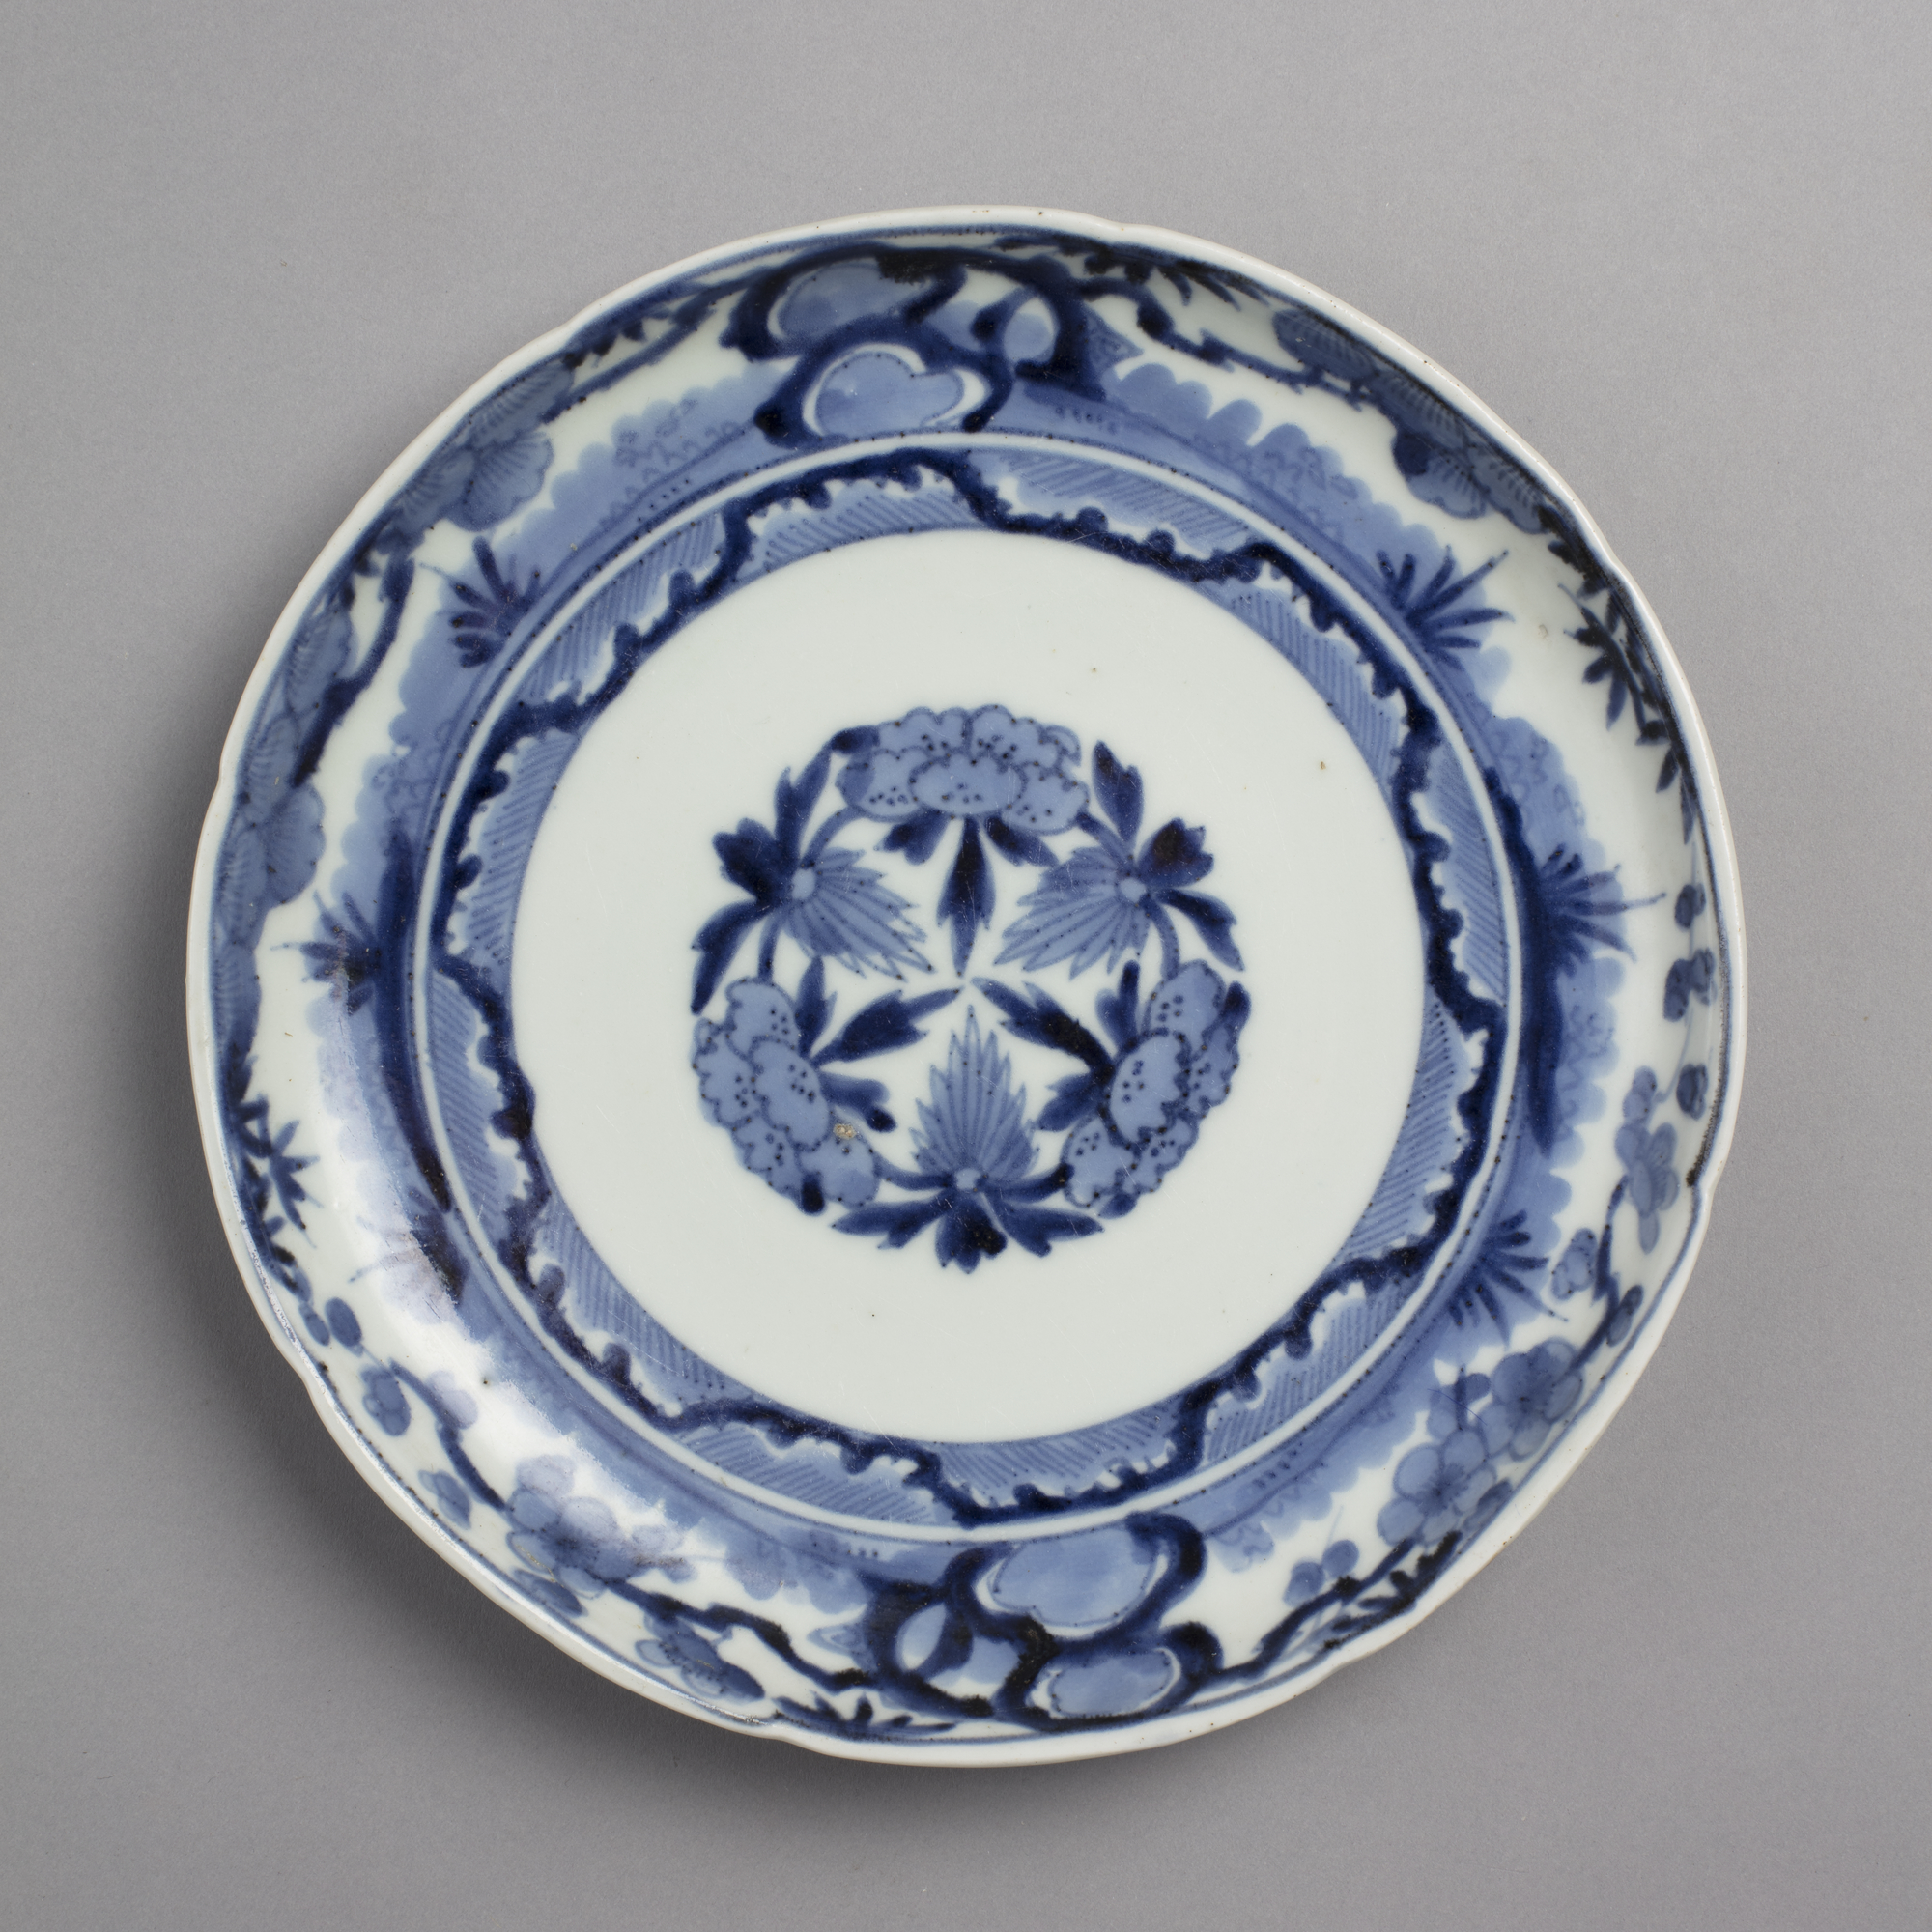 Dish with blue on white design of pine, bamboo, and plum